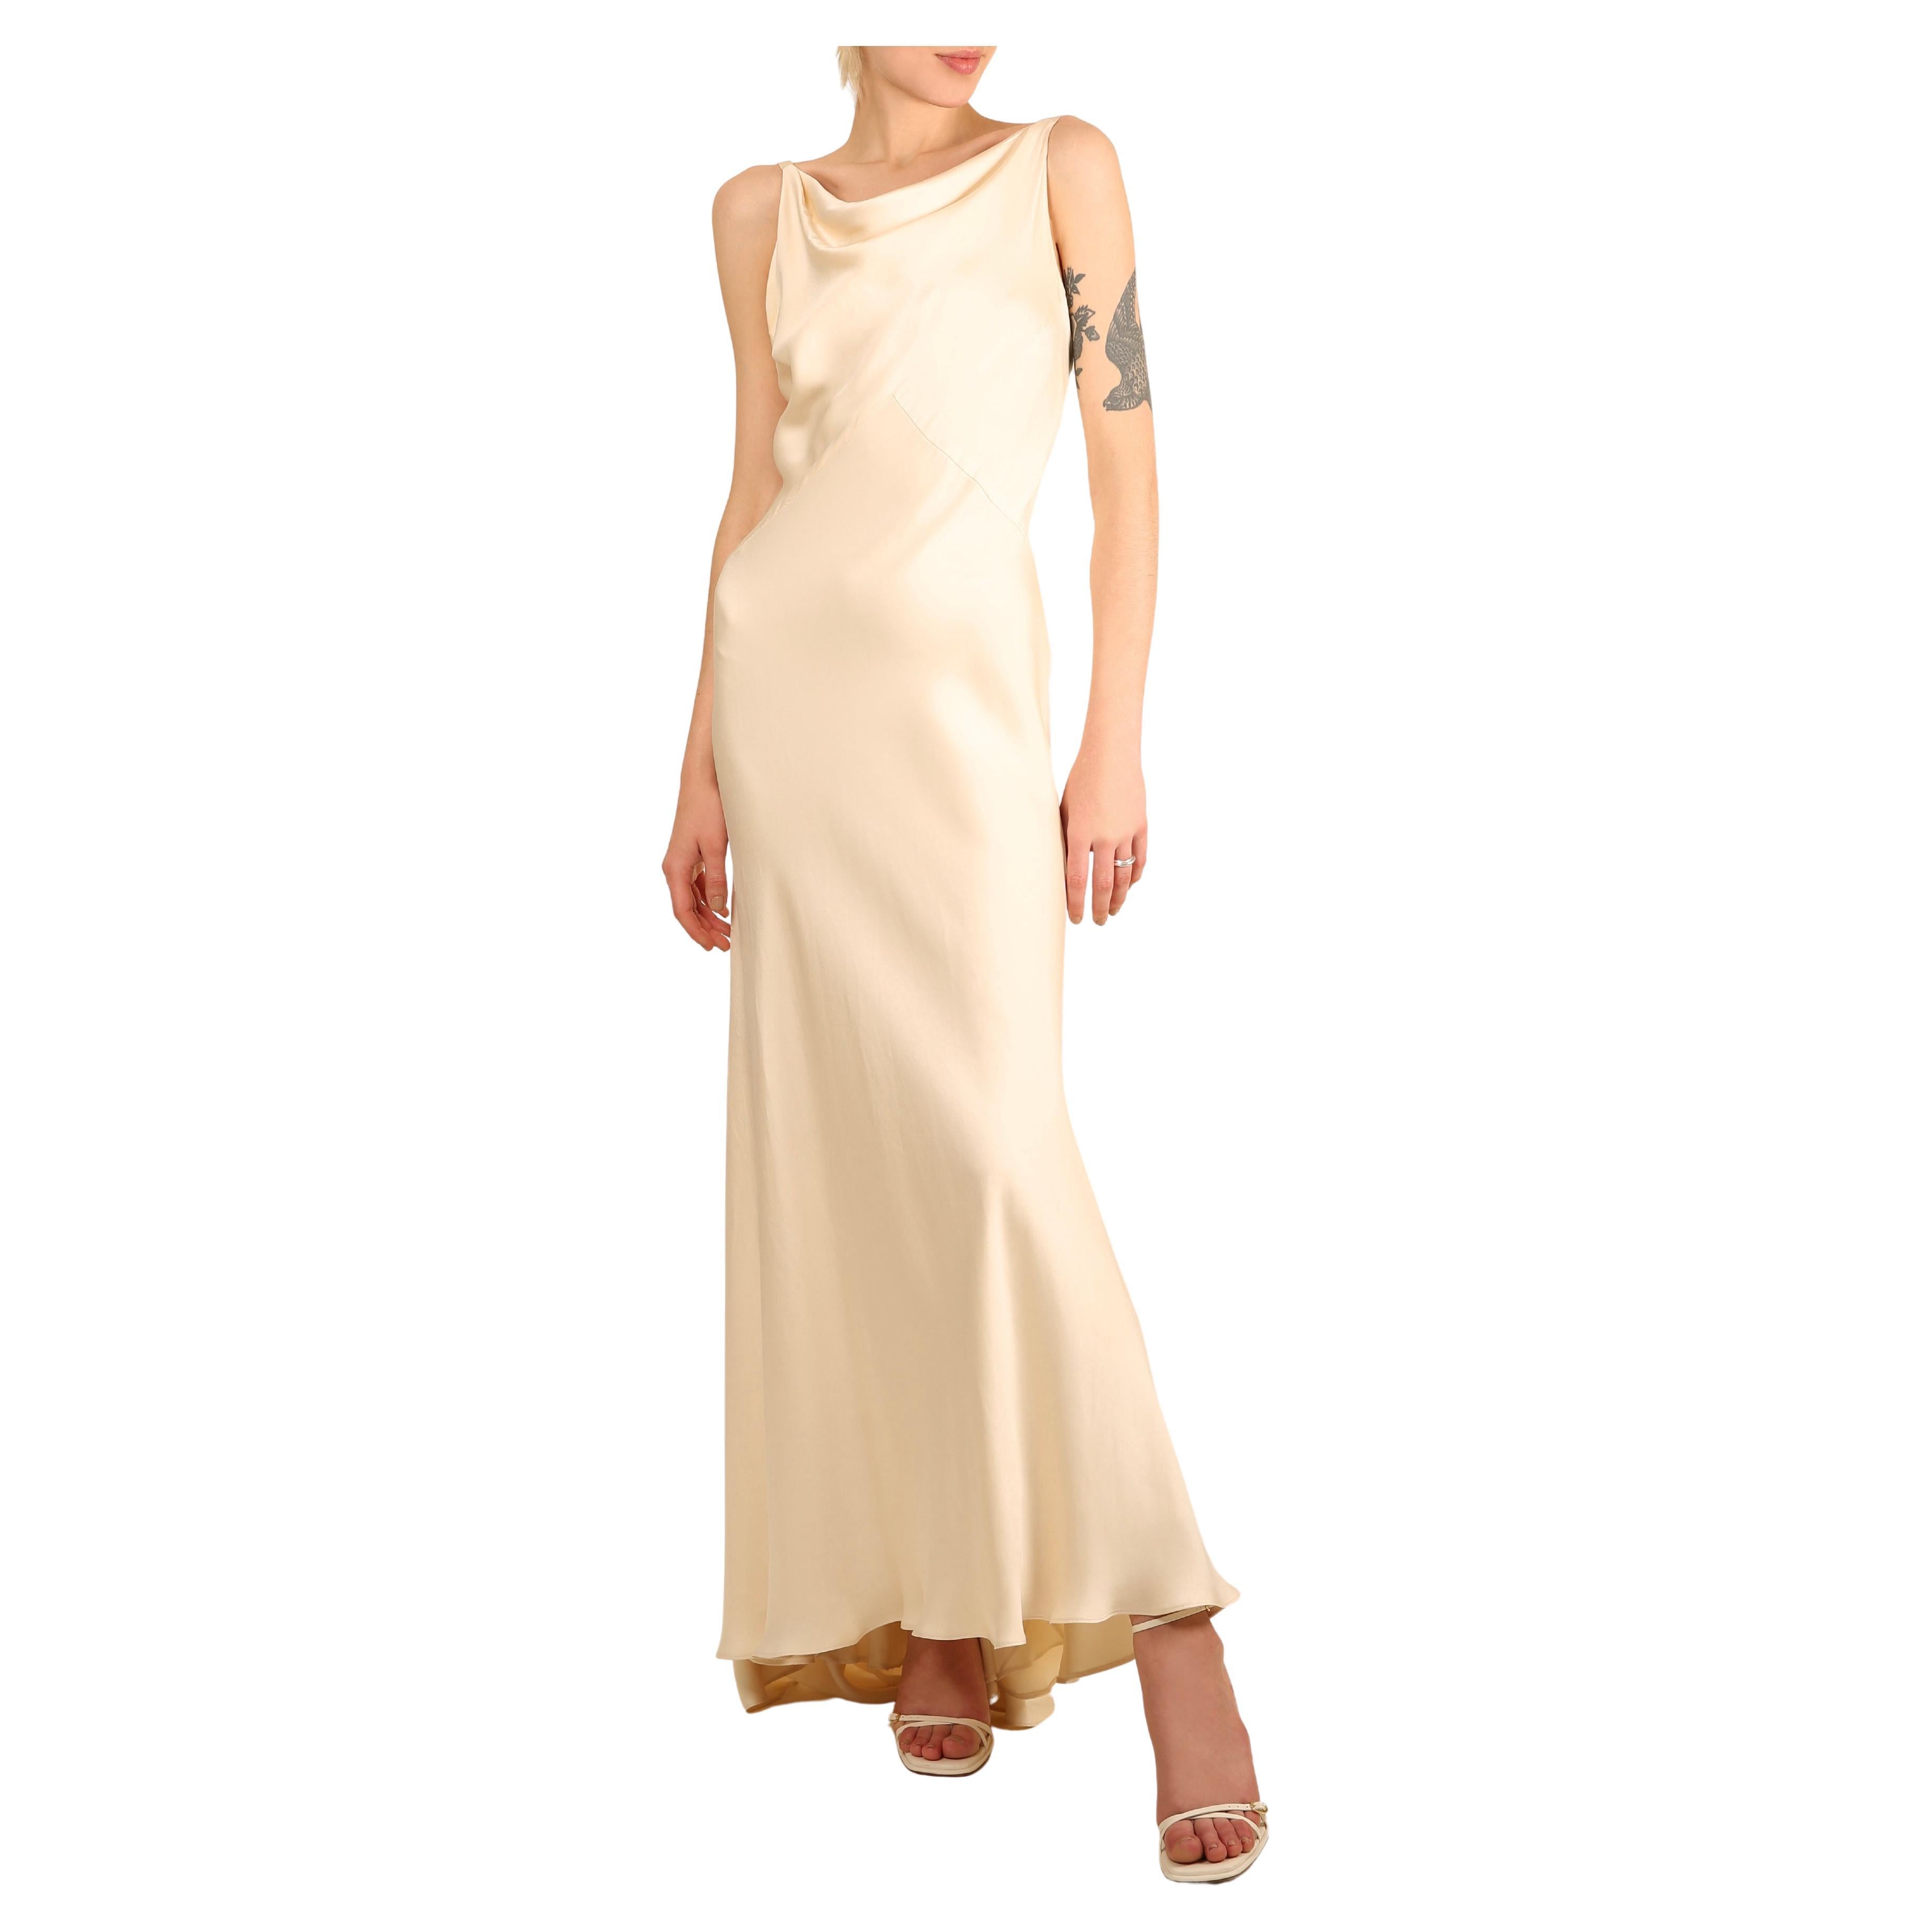 Ralph Lauren champagne bias cut backless silk slip style backless gown dress For Sale